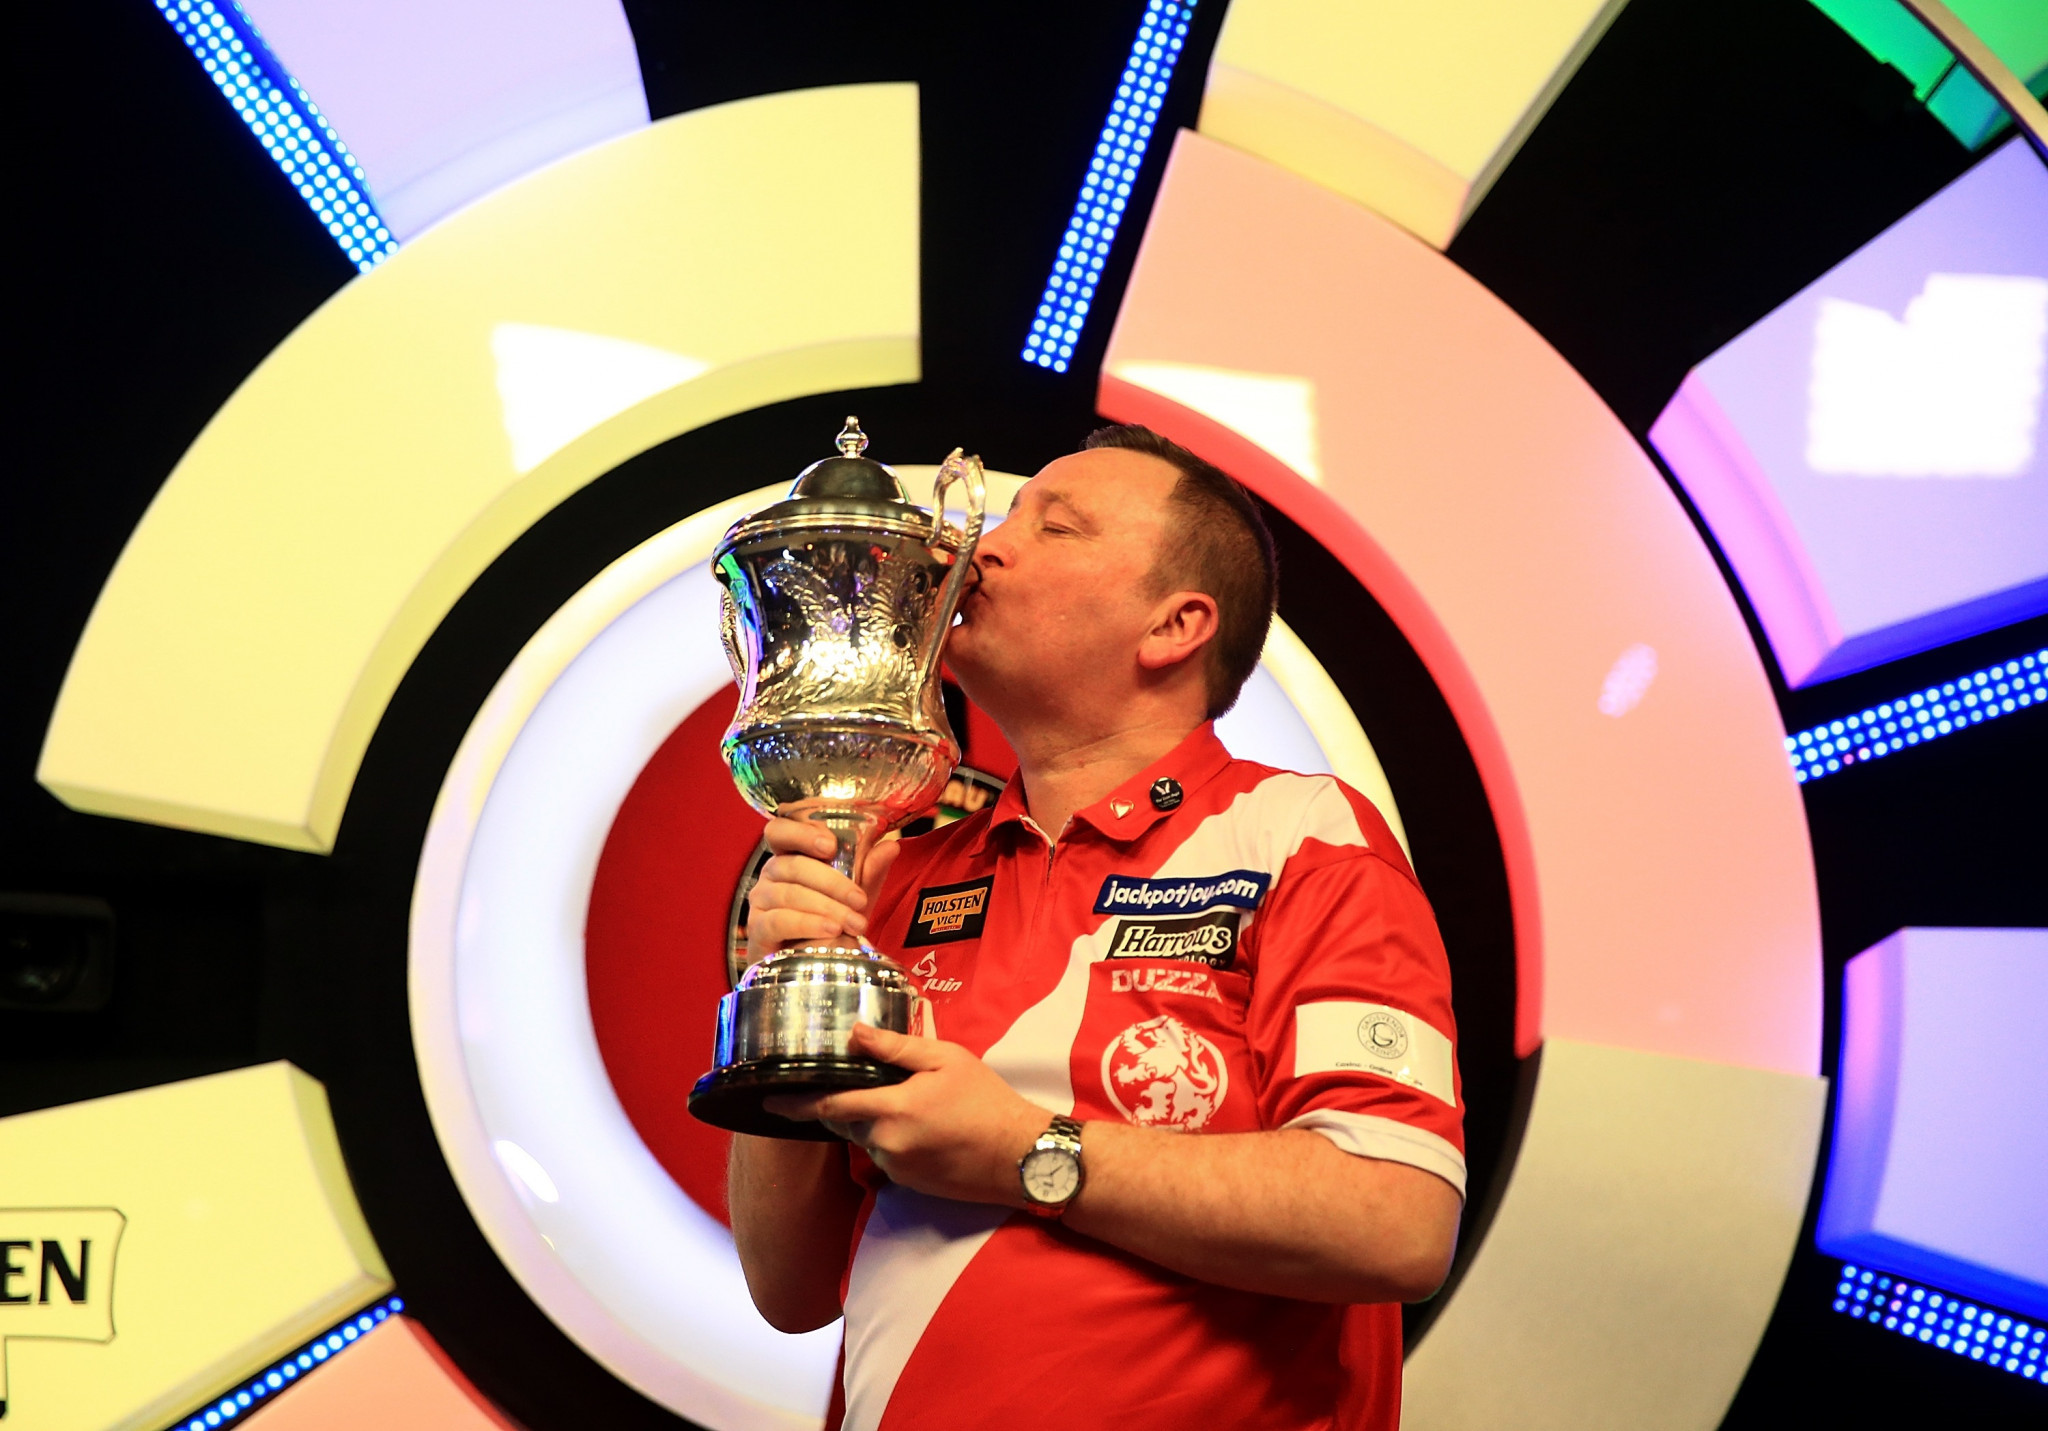 Durrant out to defend title at BDO World Championships